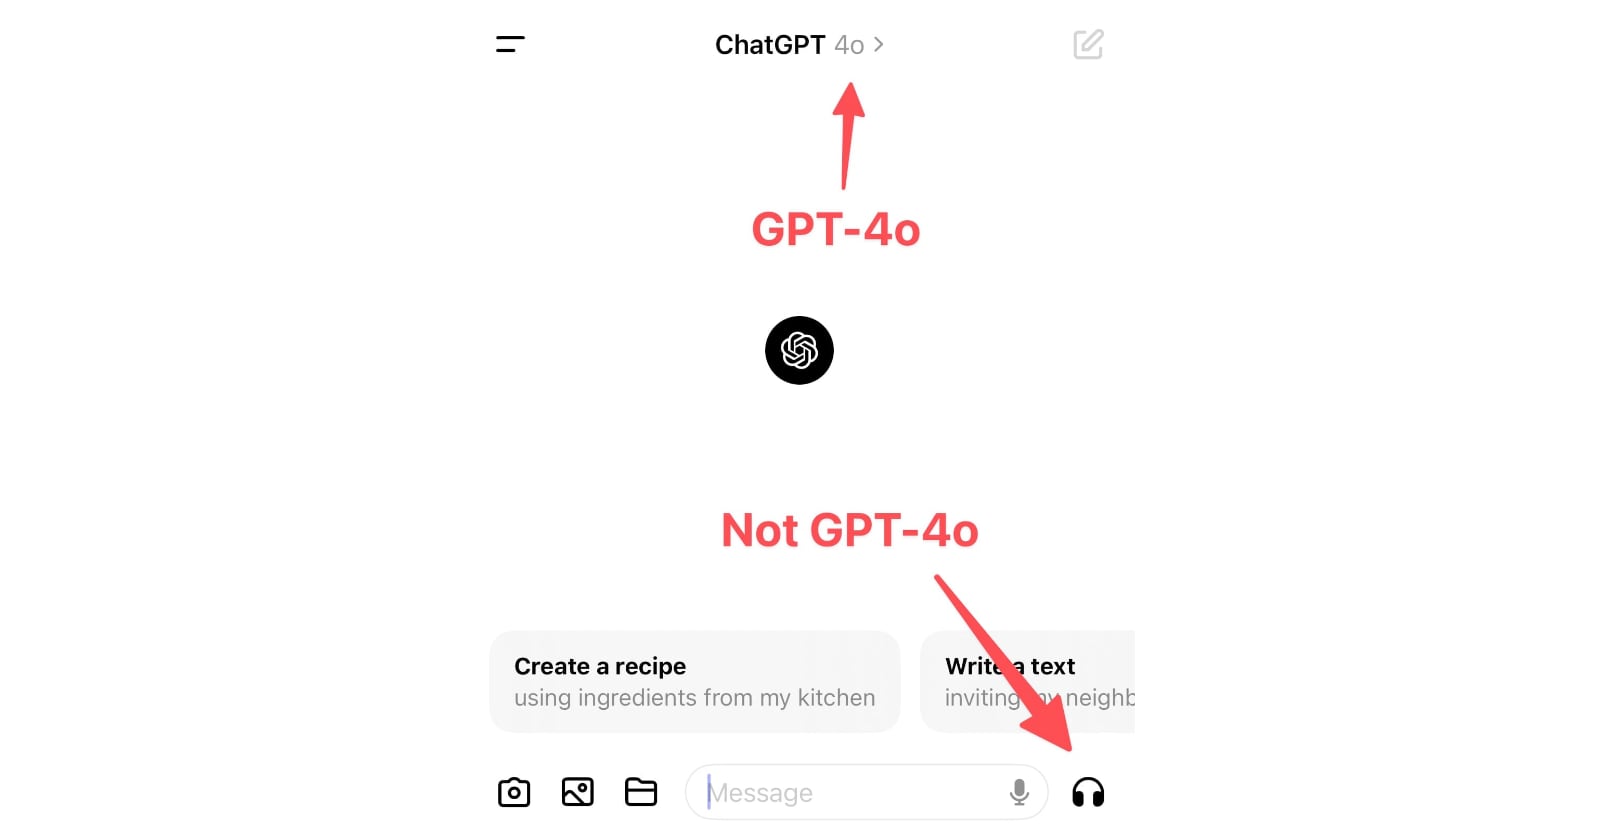 Visit ChatGPT in "4o" mode is not running the new features yet